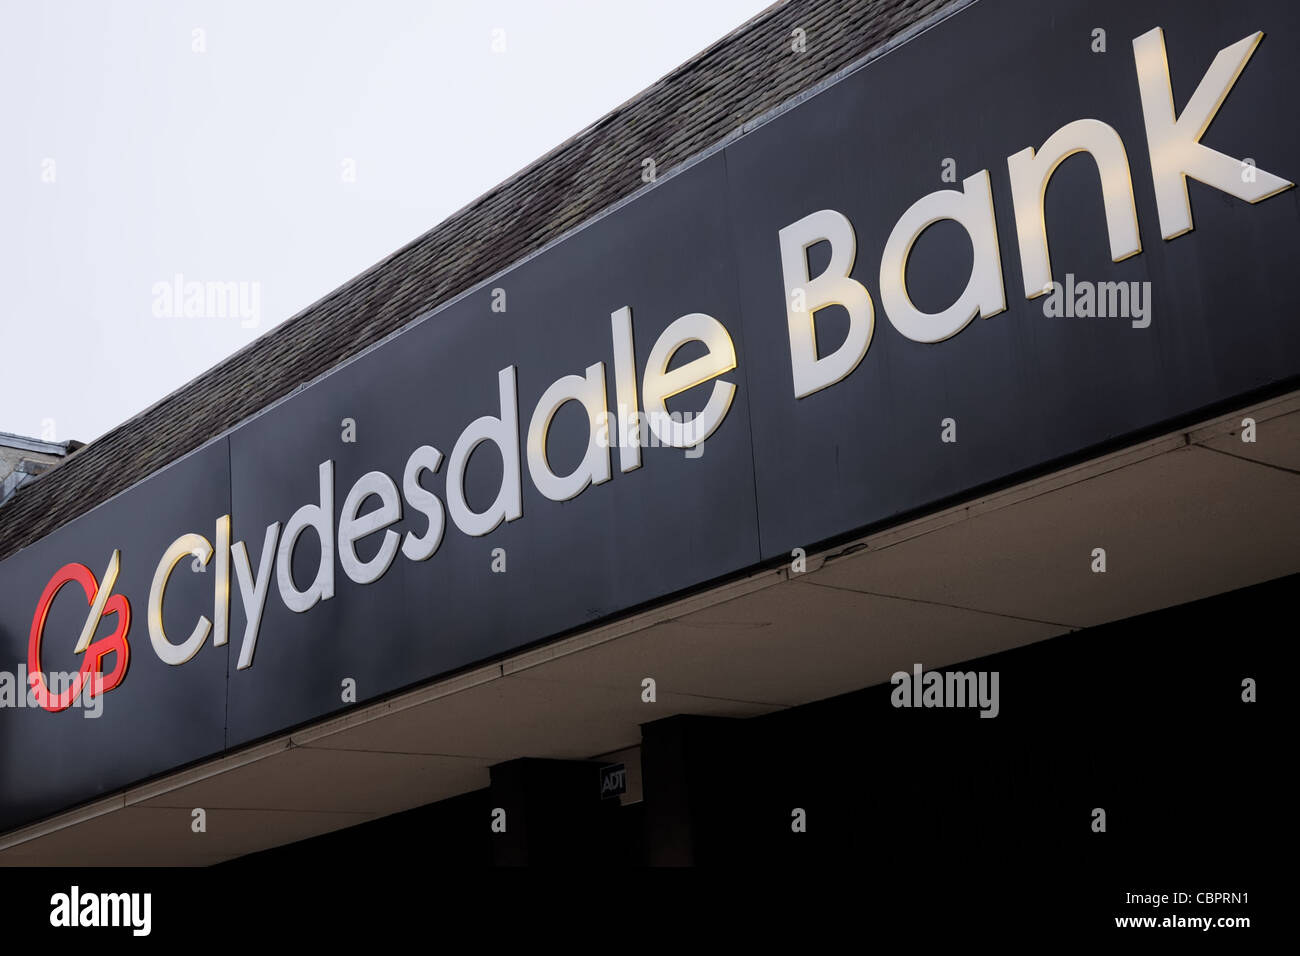 Clydesdale Bank shop front sign in Scotland, UK Stock Photo